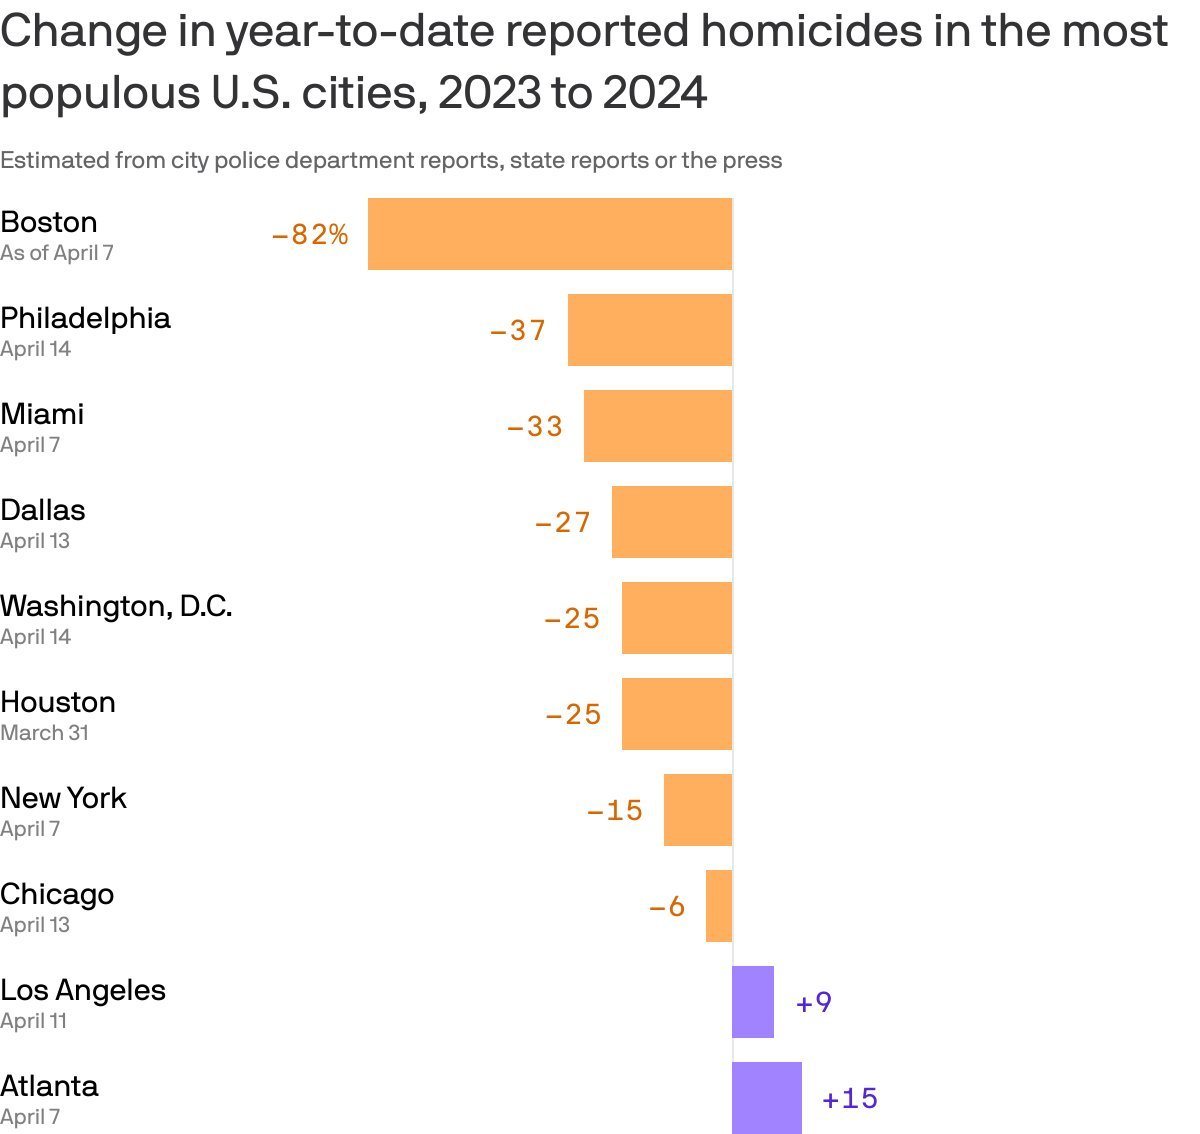 Murders have dropped by TWENTY PERCENT (!!) in 200 cities in the last year. Many of Biden's policies explain this insane drop in crime, but the 2022 gun bill is a big part of the explanation. Guess what? If you pass laws to stop criminals from getting guns, there's less crime!